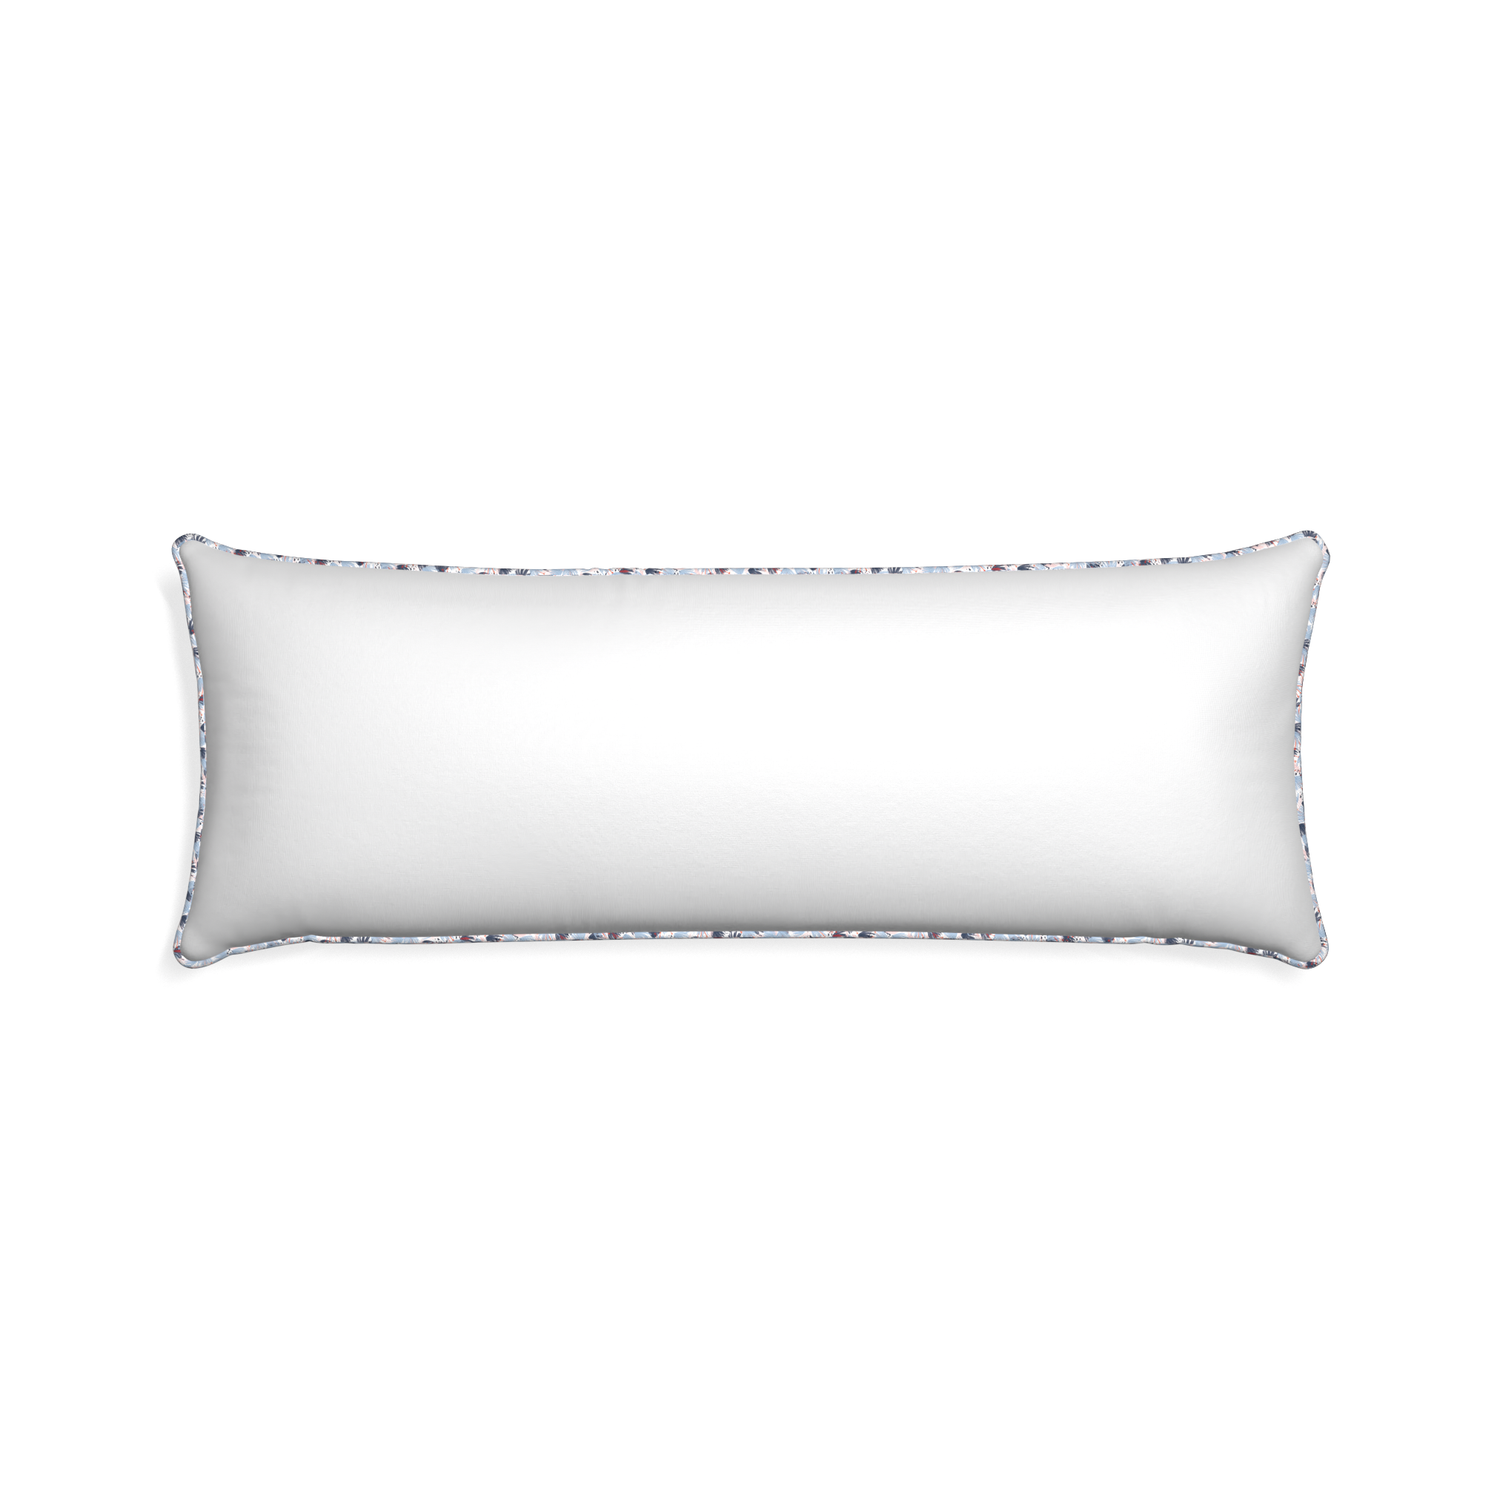 Xl-lumbar snow custom white cottonpillow with e piping on white background